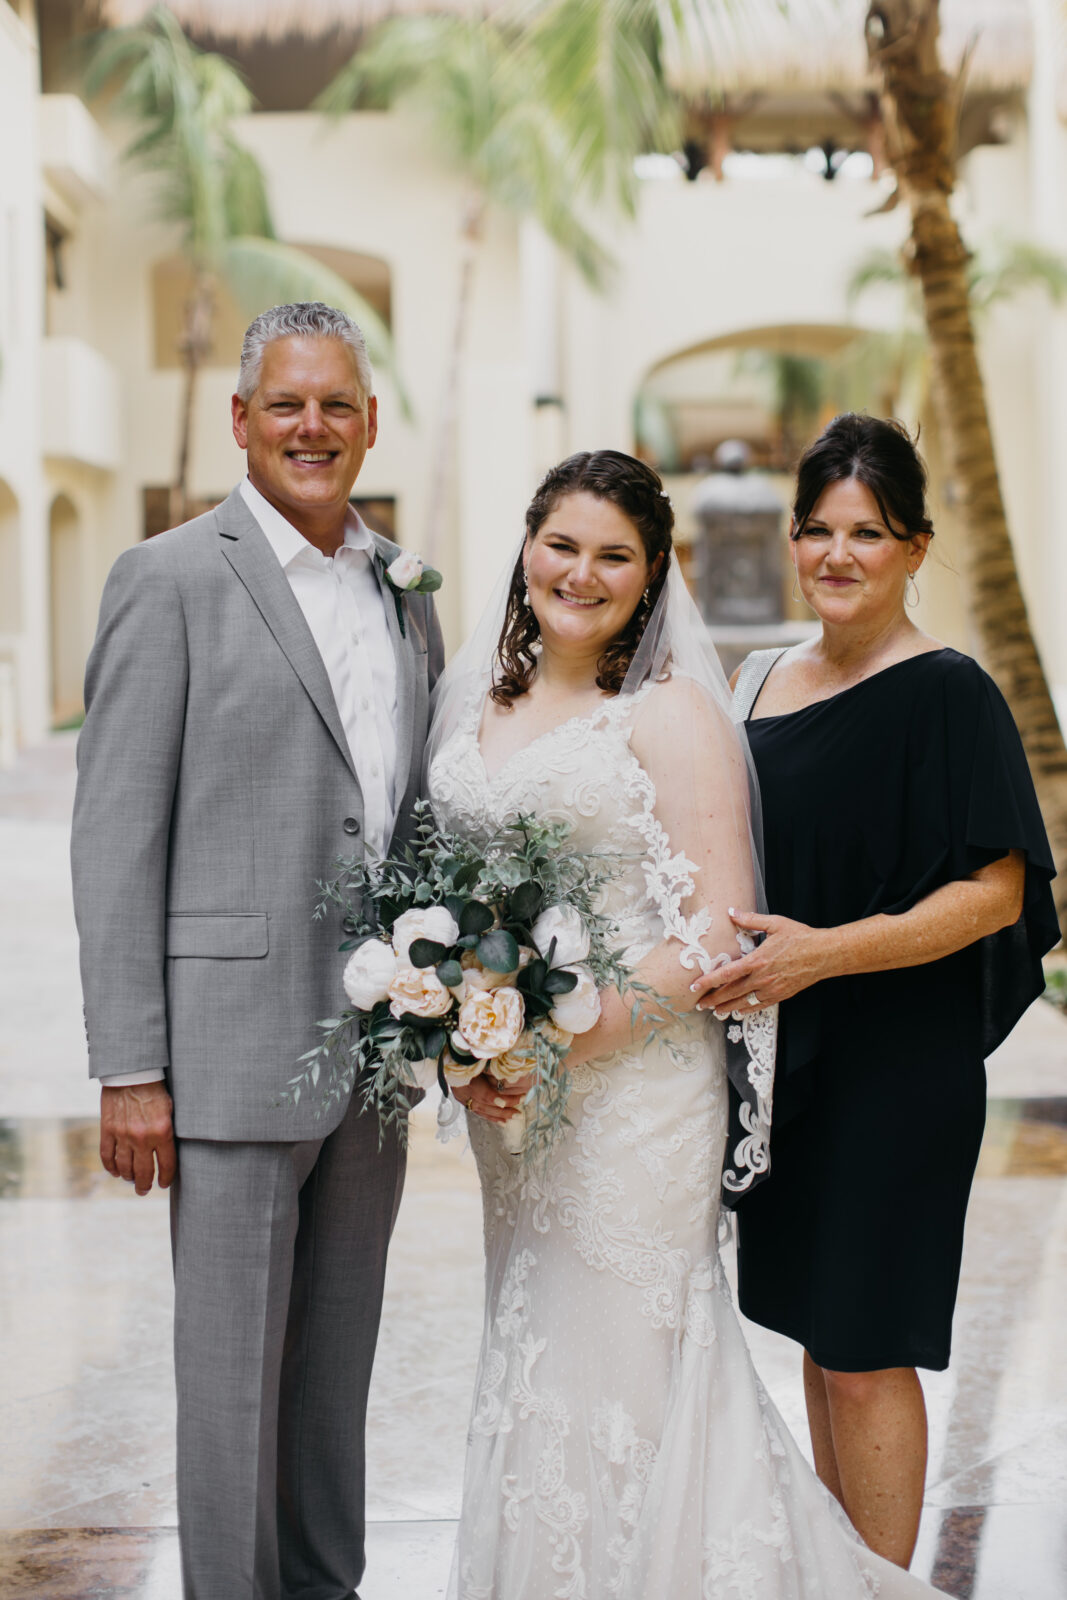 A photo of the bride and her parents